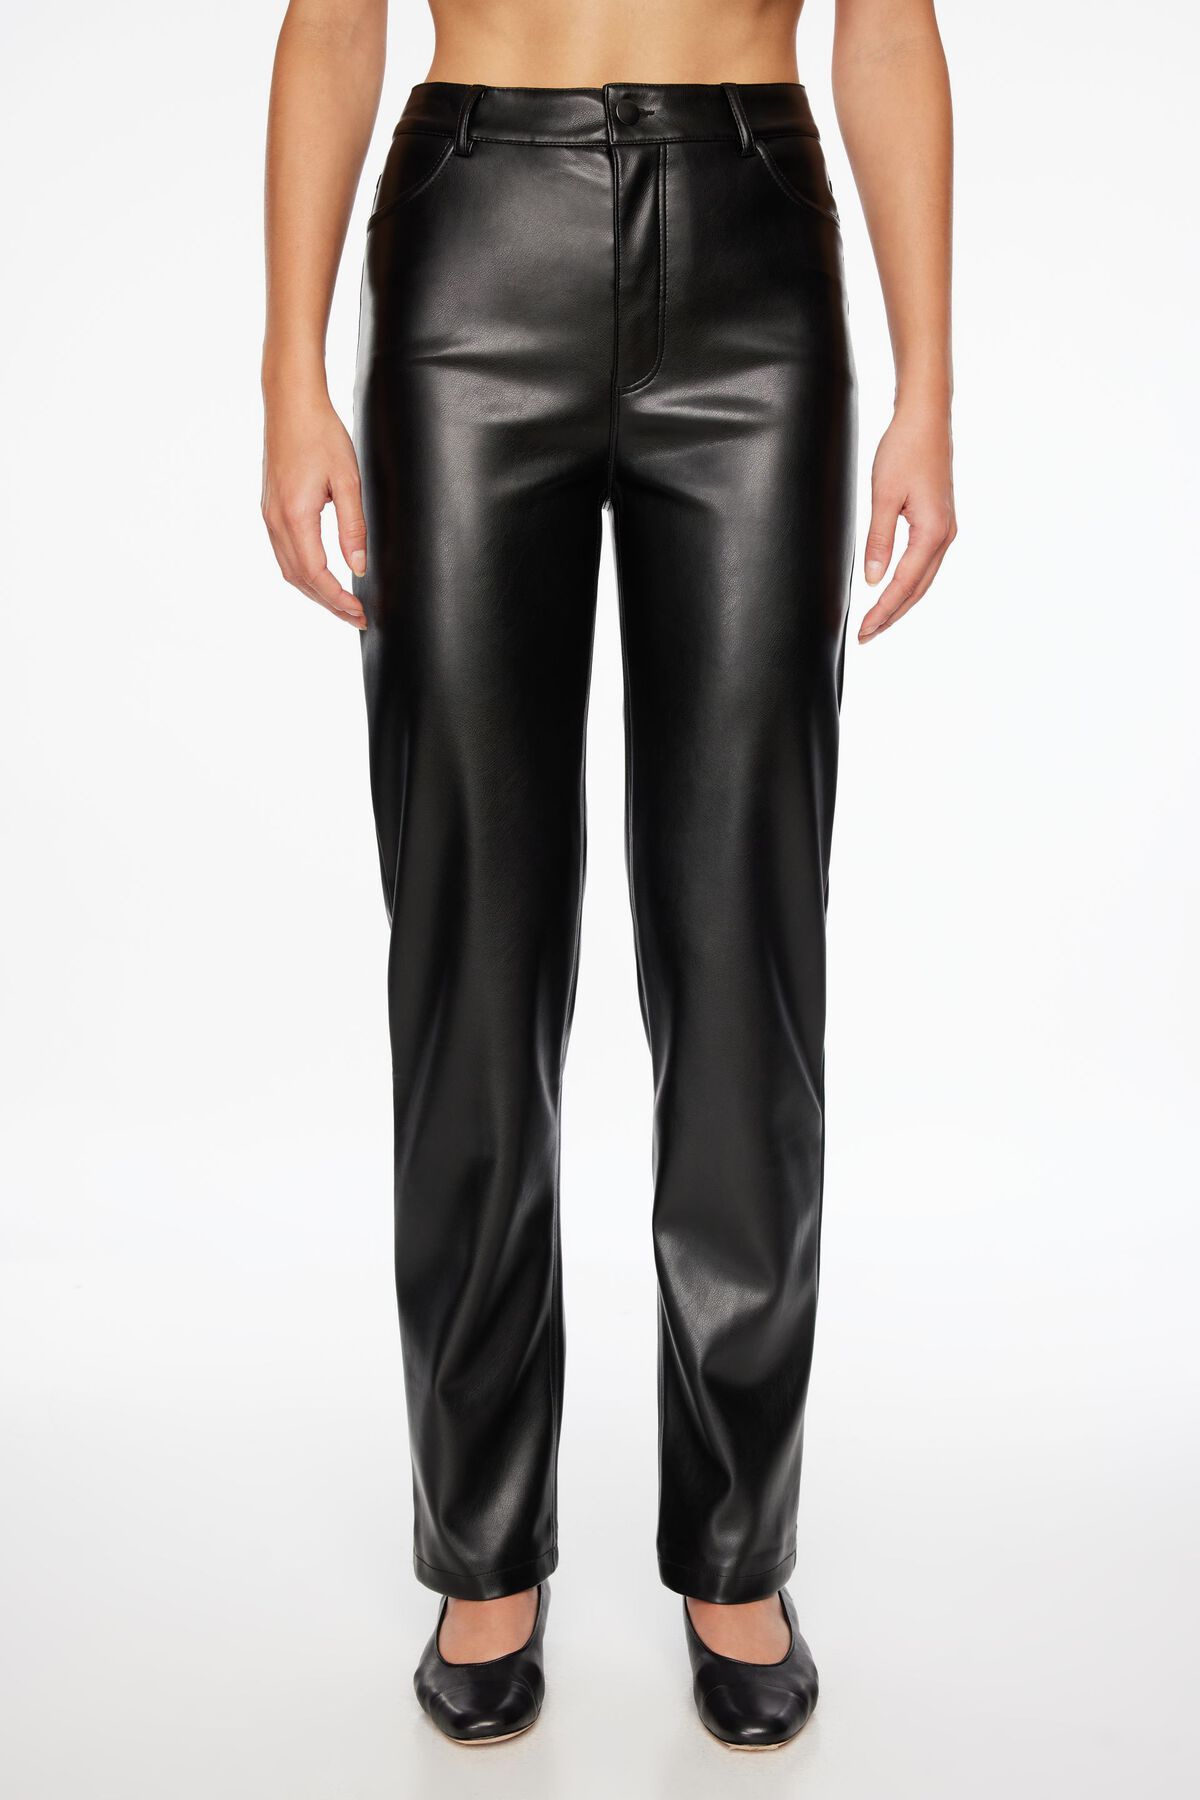 Alexis Women's Leather Pants – Extreme Biker Leather